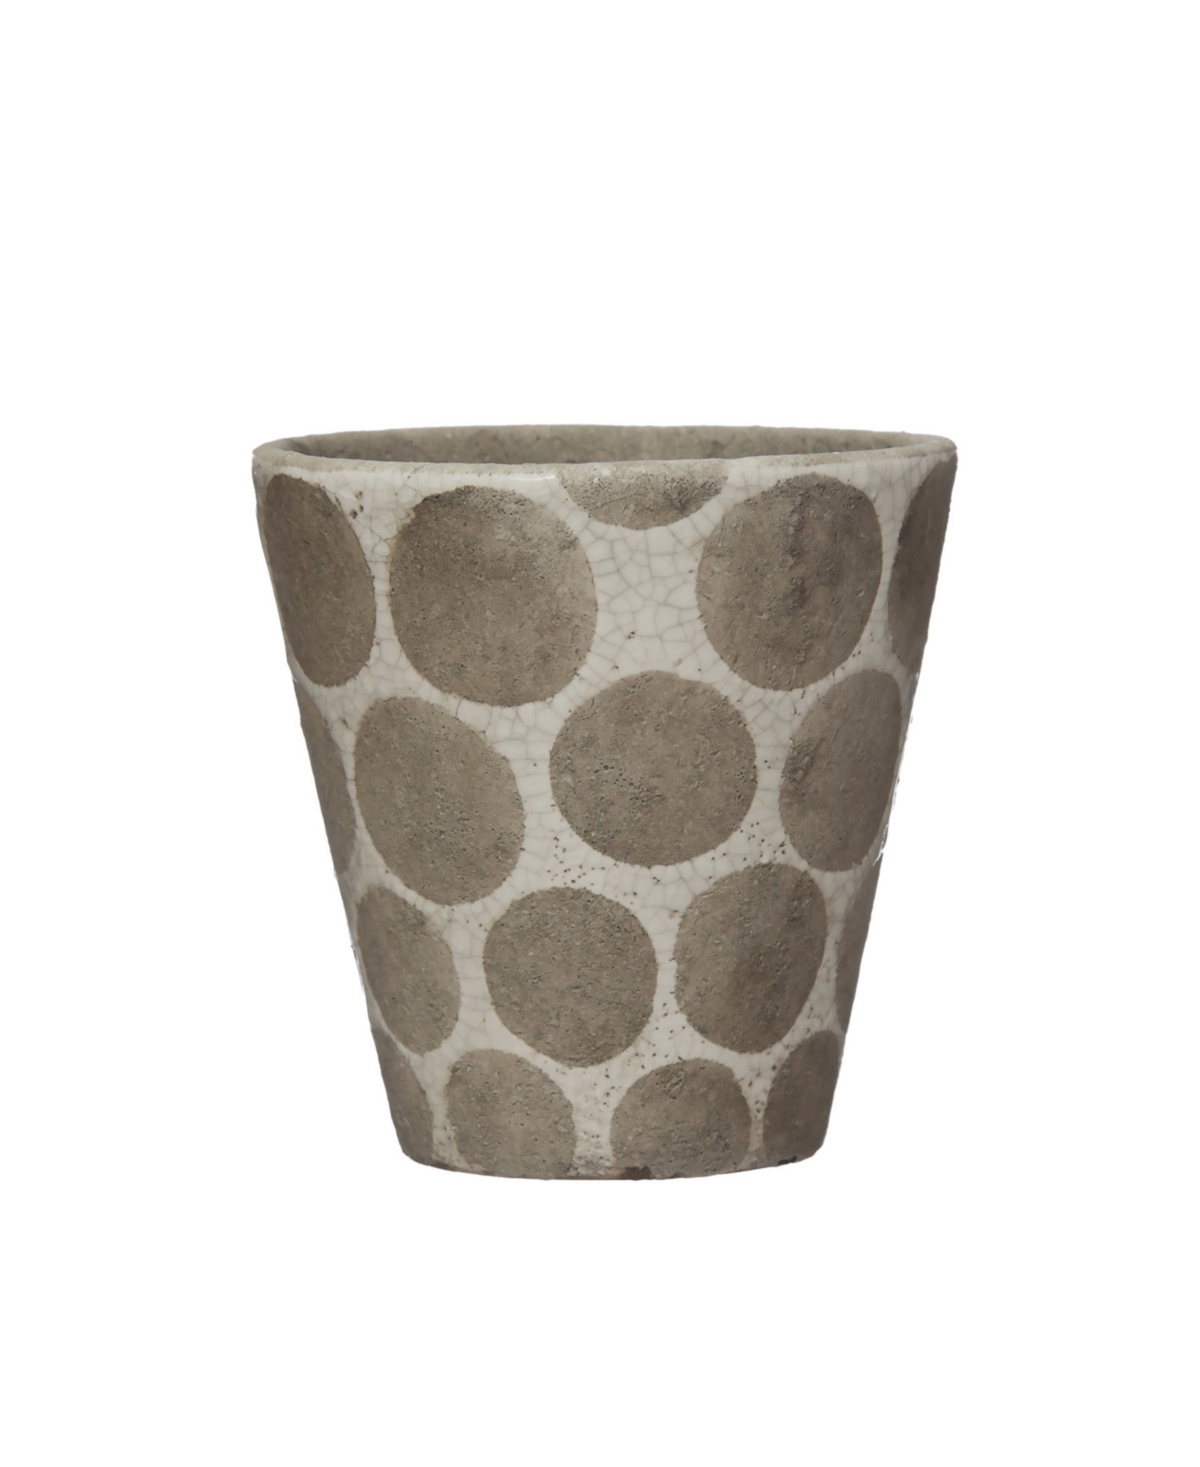 Terra-Cotta Planter with Wax Relief Dots - Greige